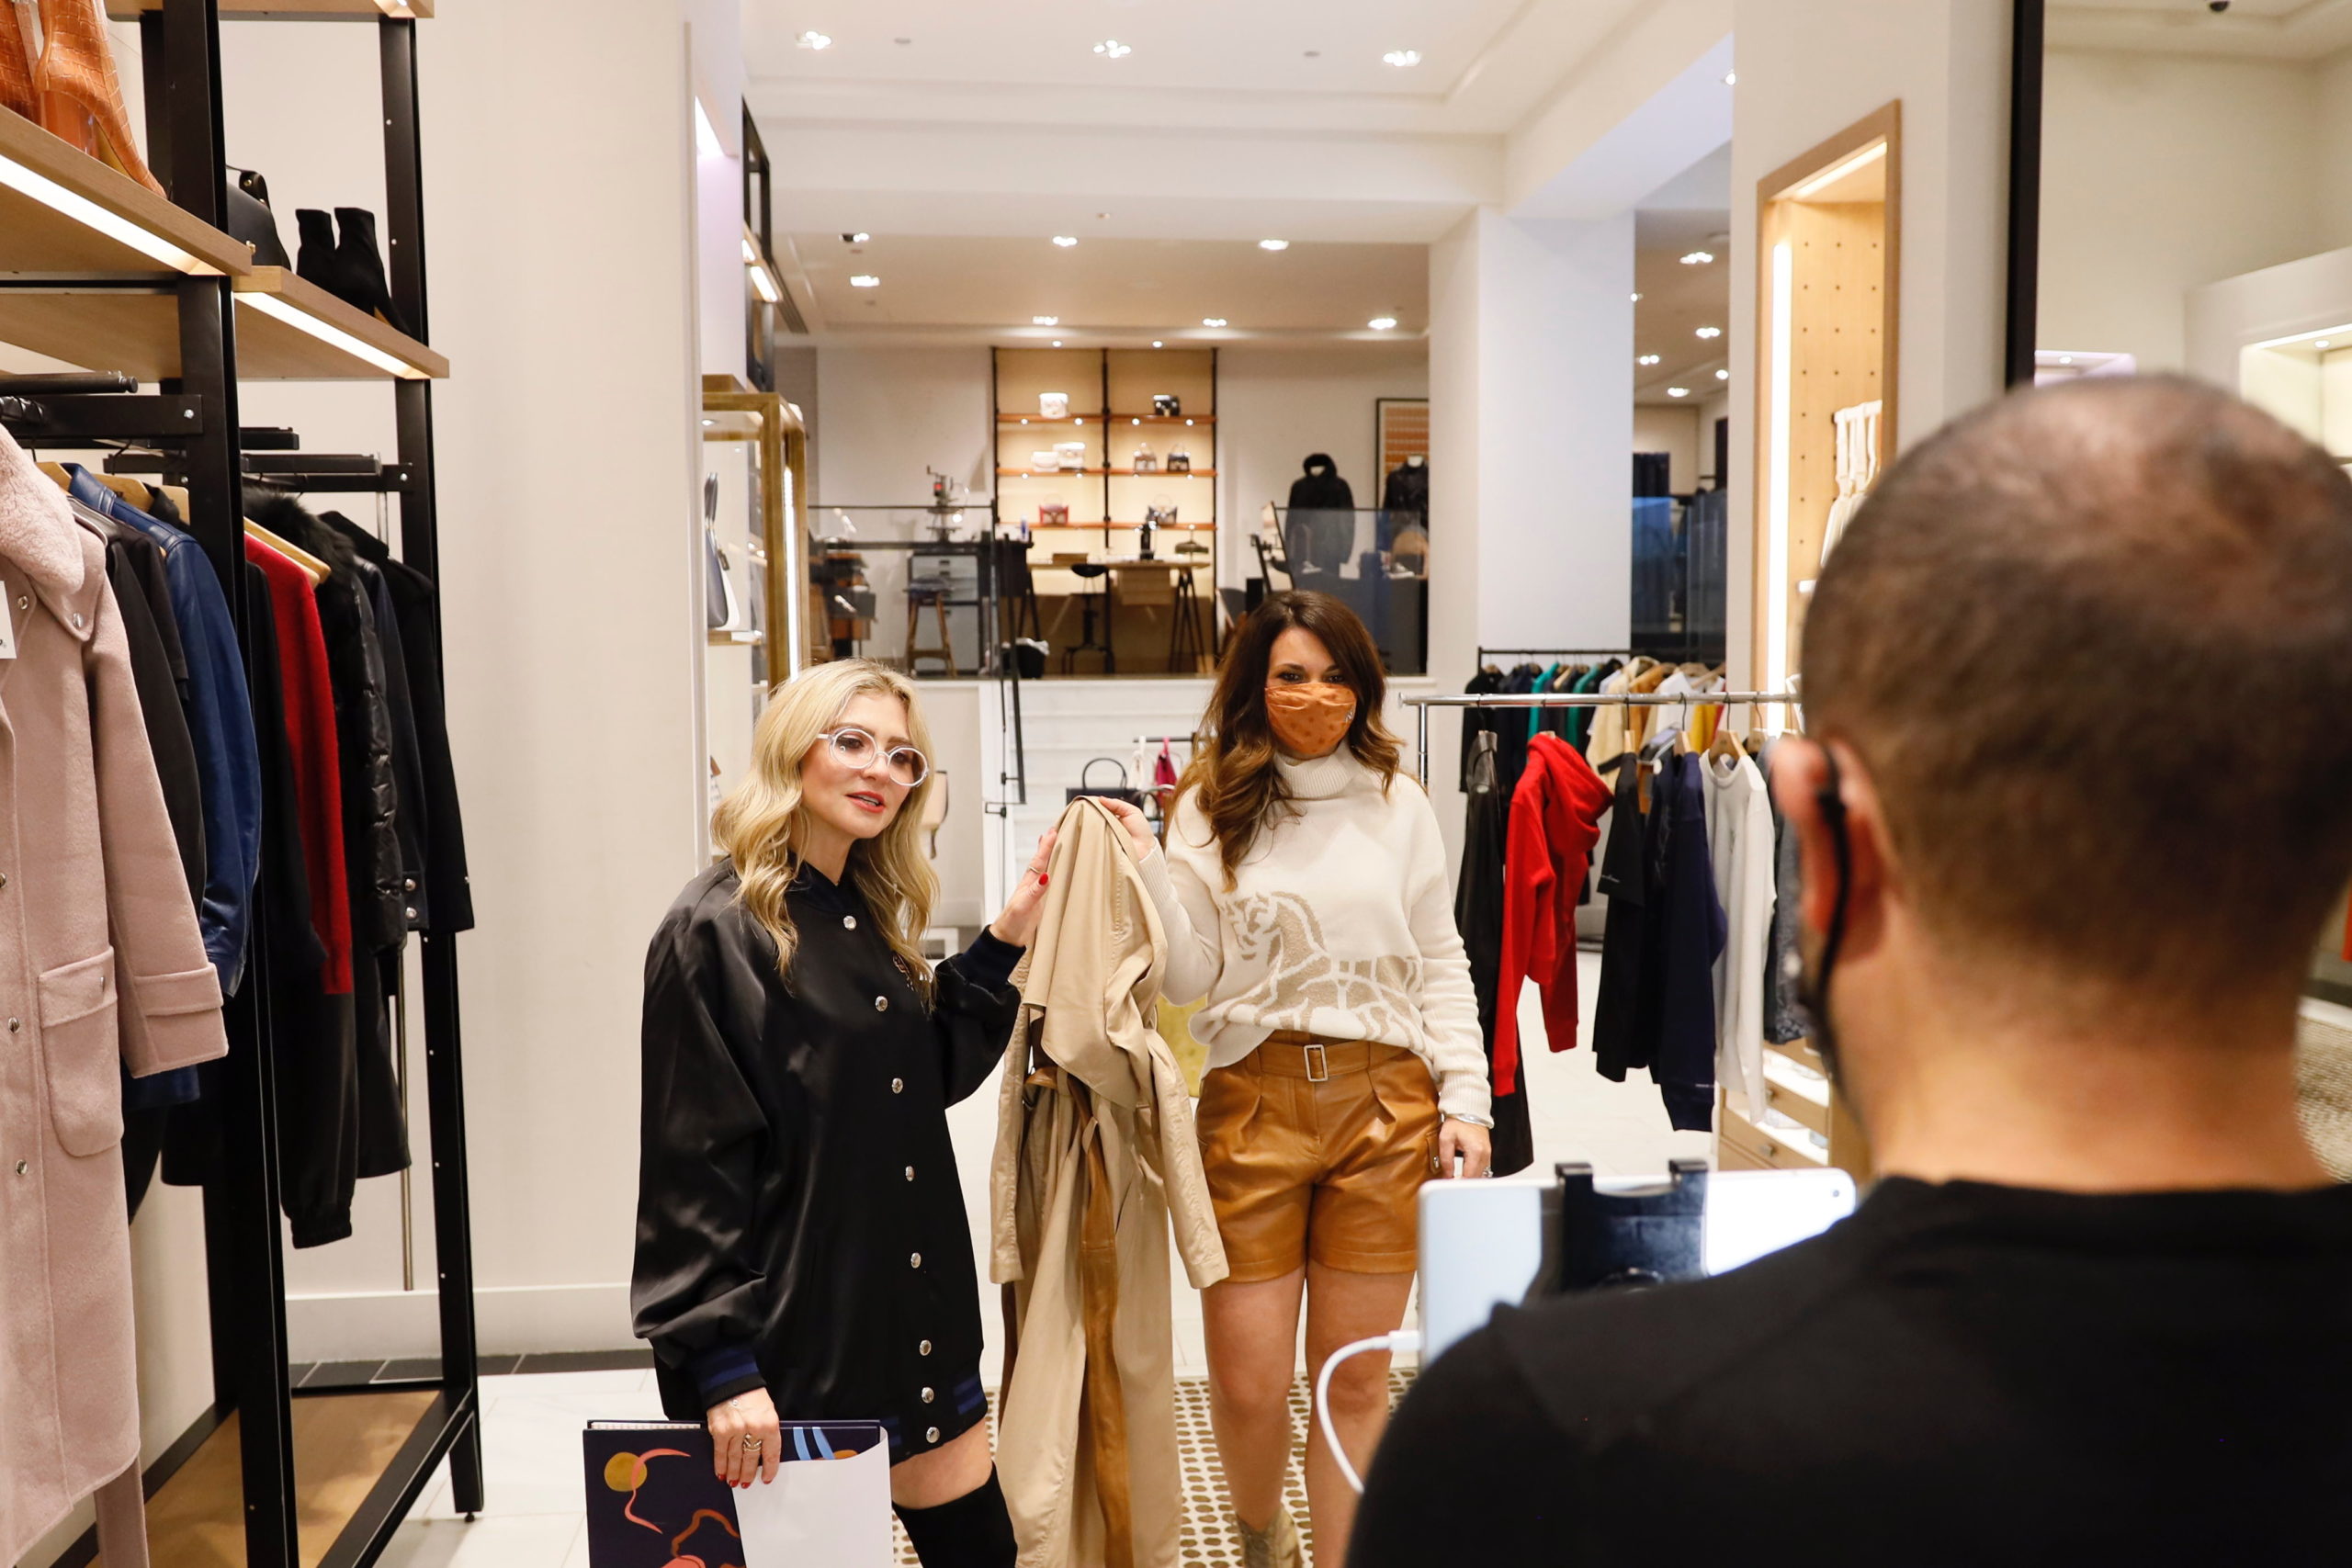 VIRTUAL EVENT RECAP: FALL TRENDS AND STYLING WITH COACH - Tel Aviv Couture